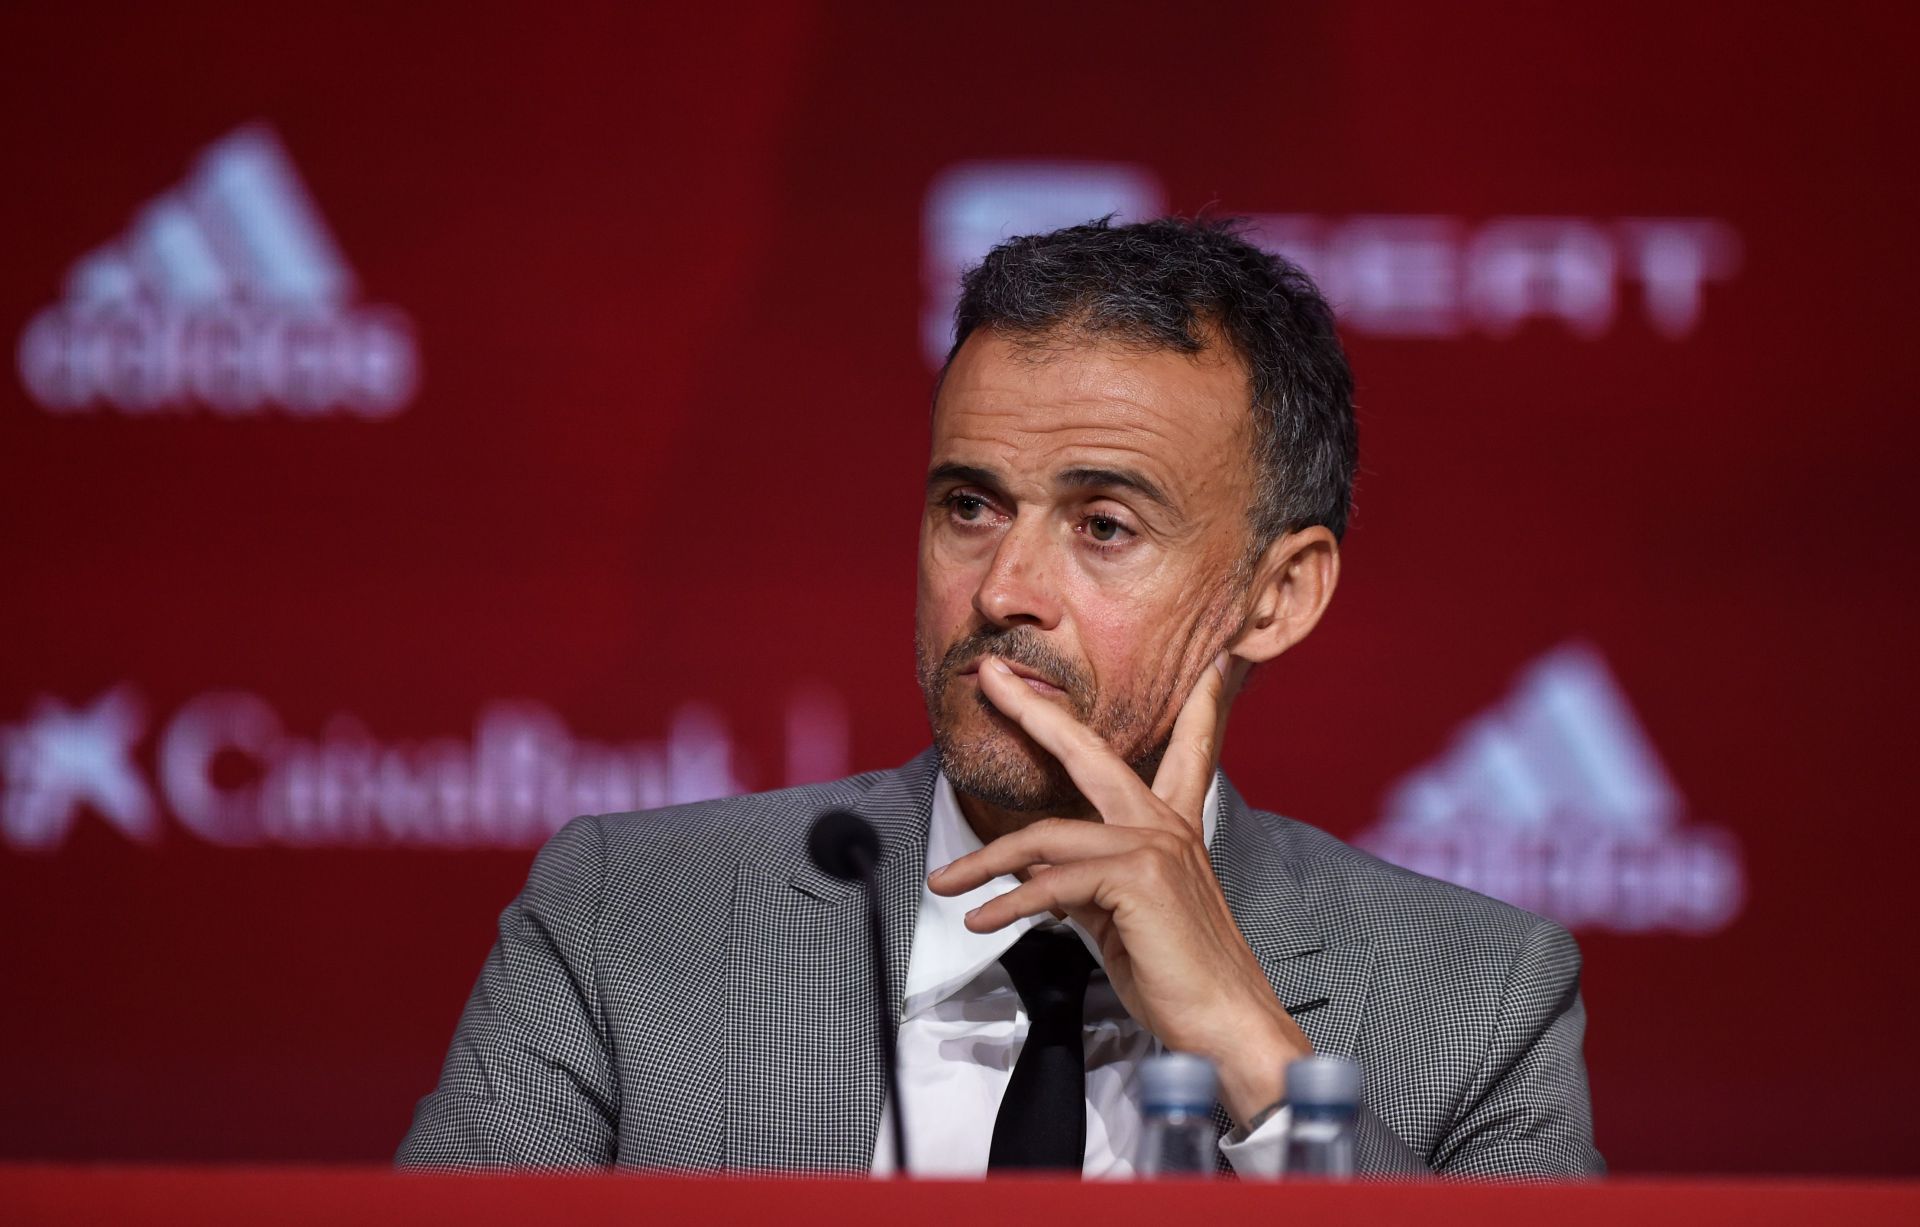 Luis Enrique is currently shinning with the Spanish national team